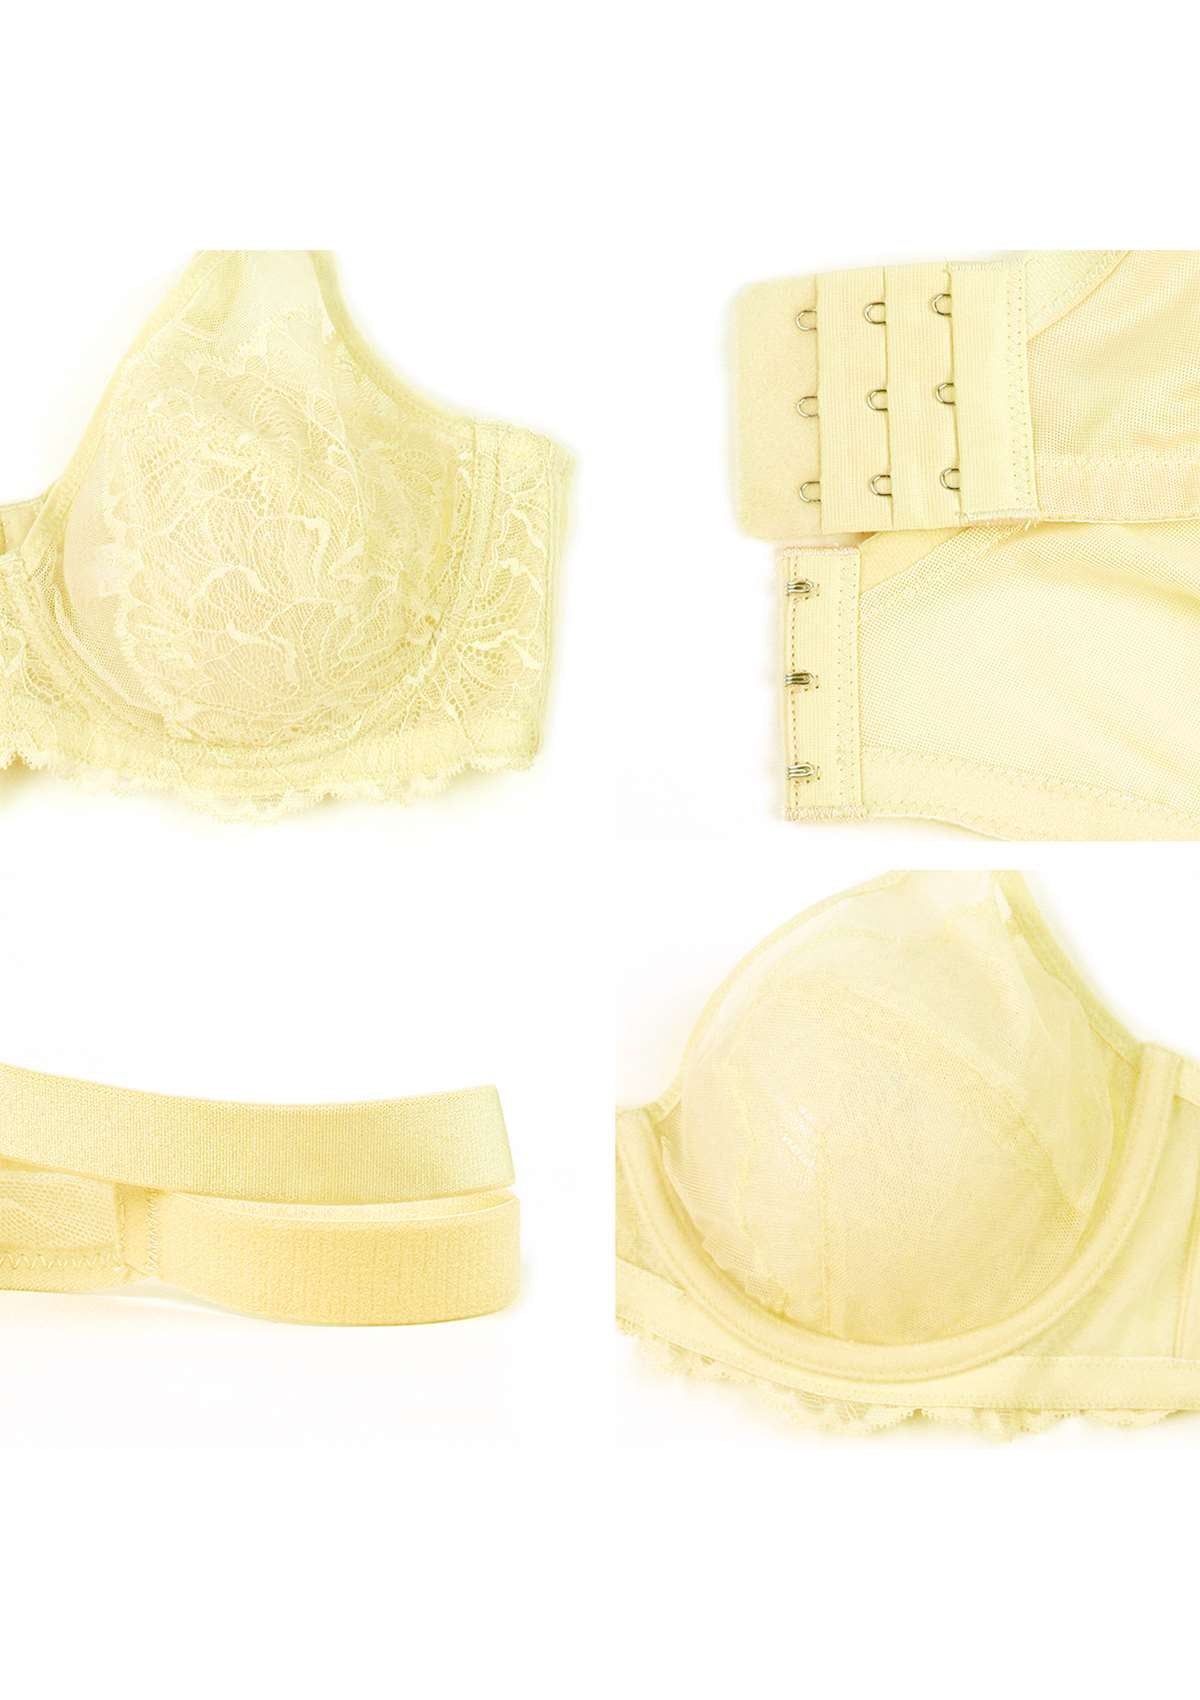 HSIA Blossom Full Coverage Side Support Bra: Designed For Heavy Busts - Light Yellow / 46 / DD/E